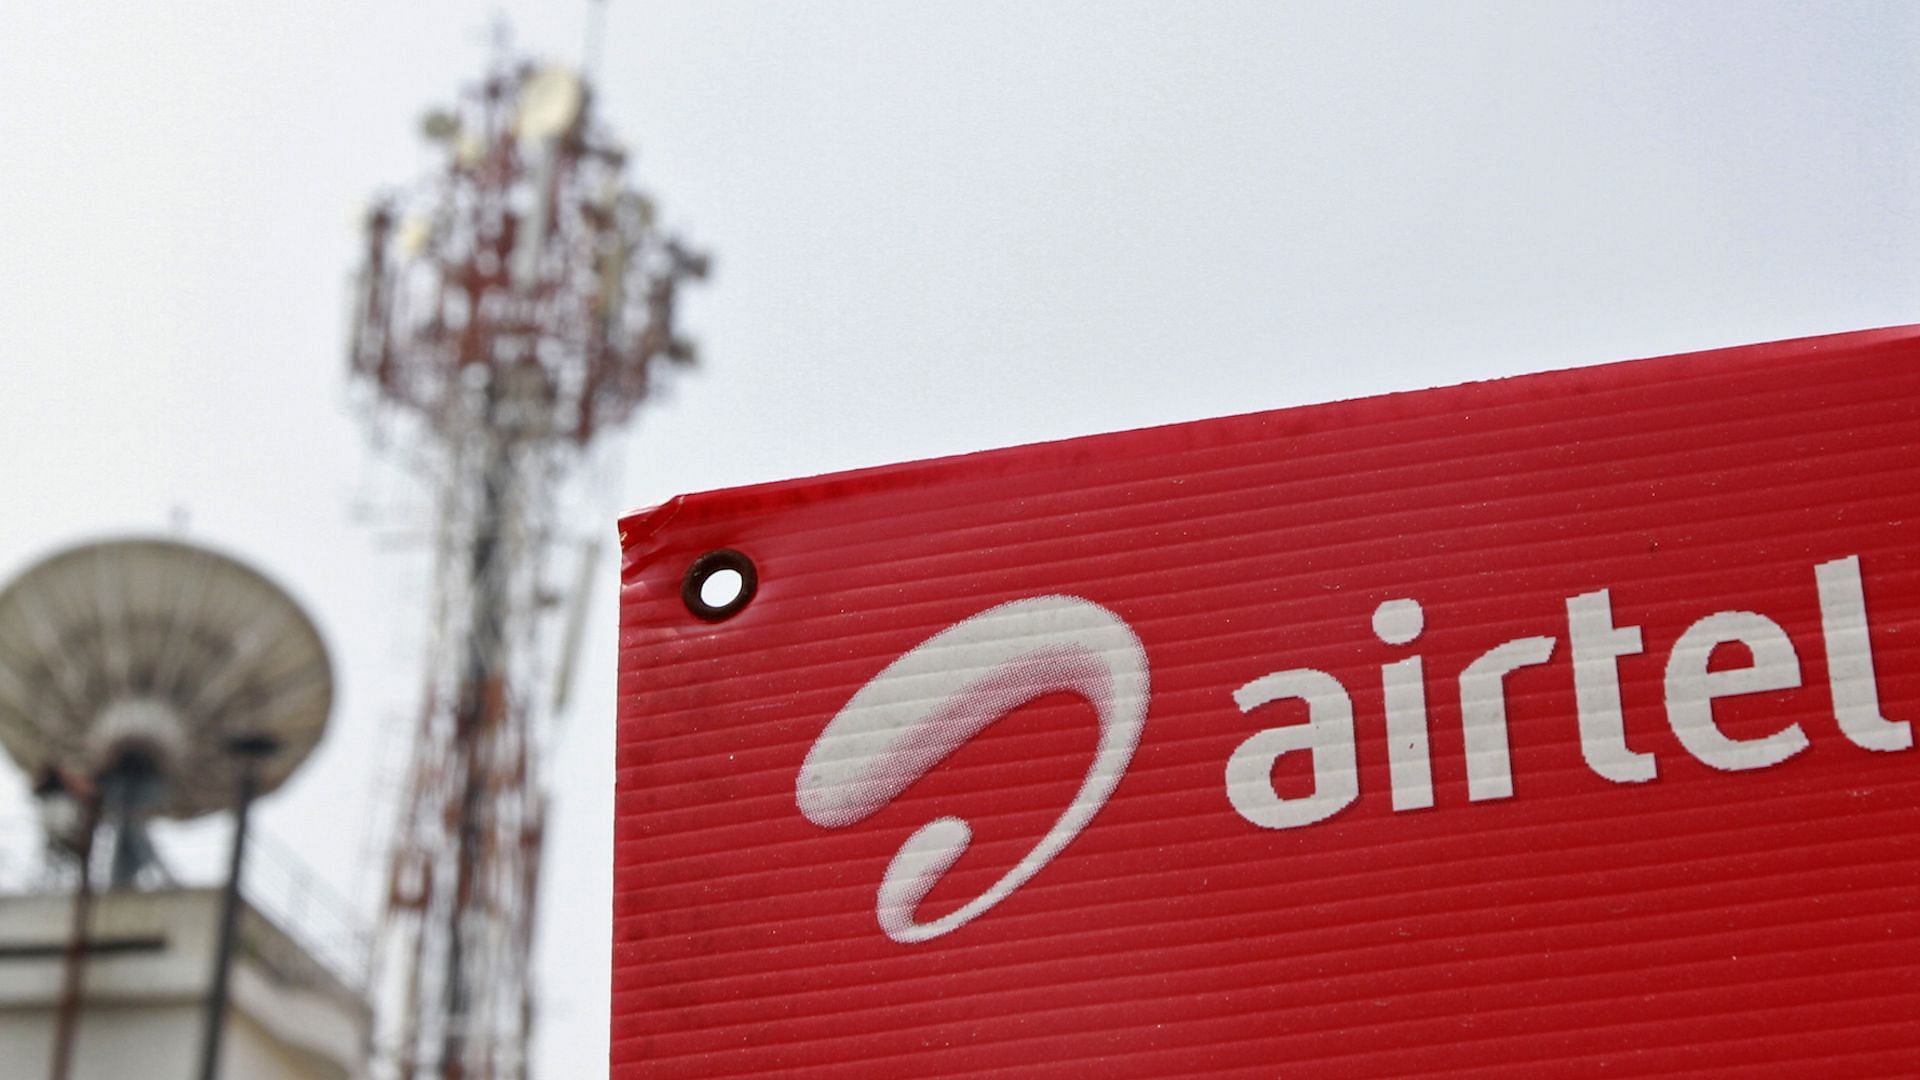 According to DoT, Airtel owed nearly Rs 35,586 crore, including licence fee, spectrum usage charges with penalties and interest.&nbsp;